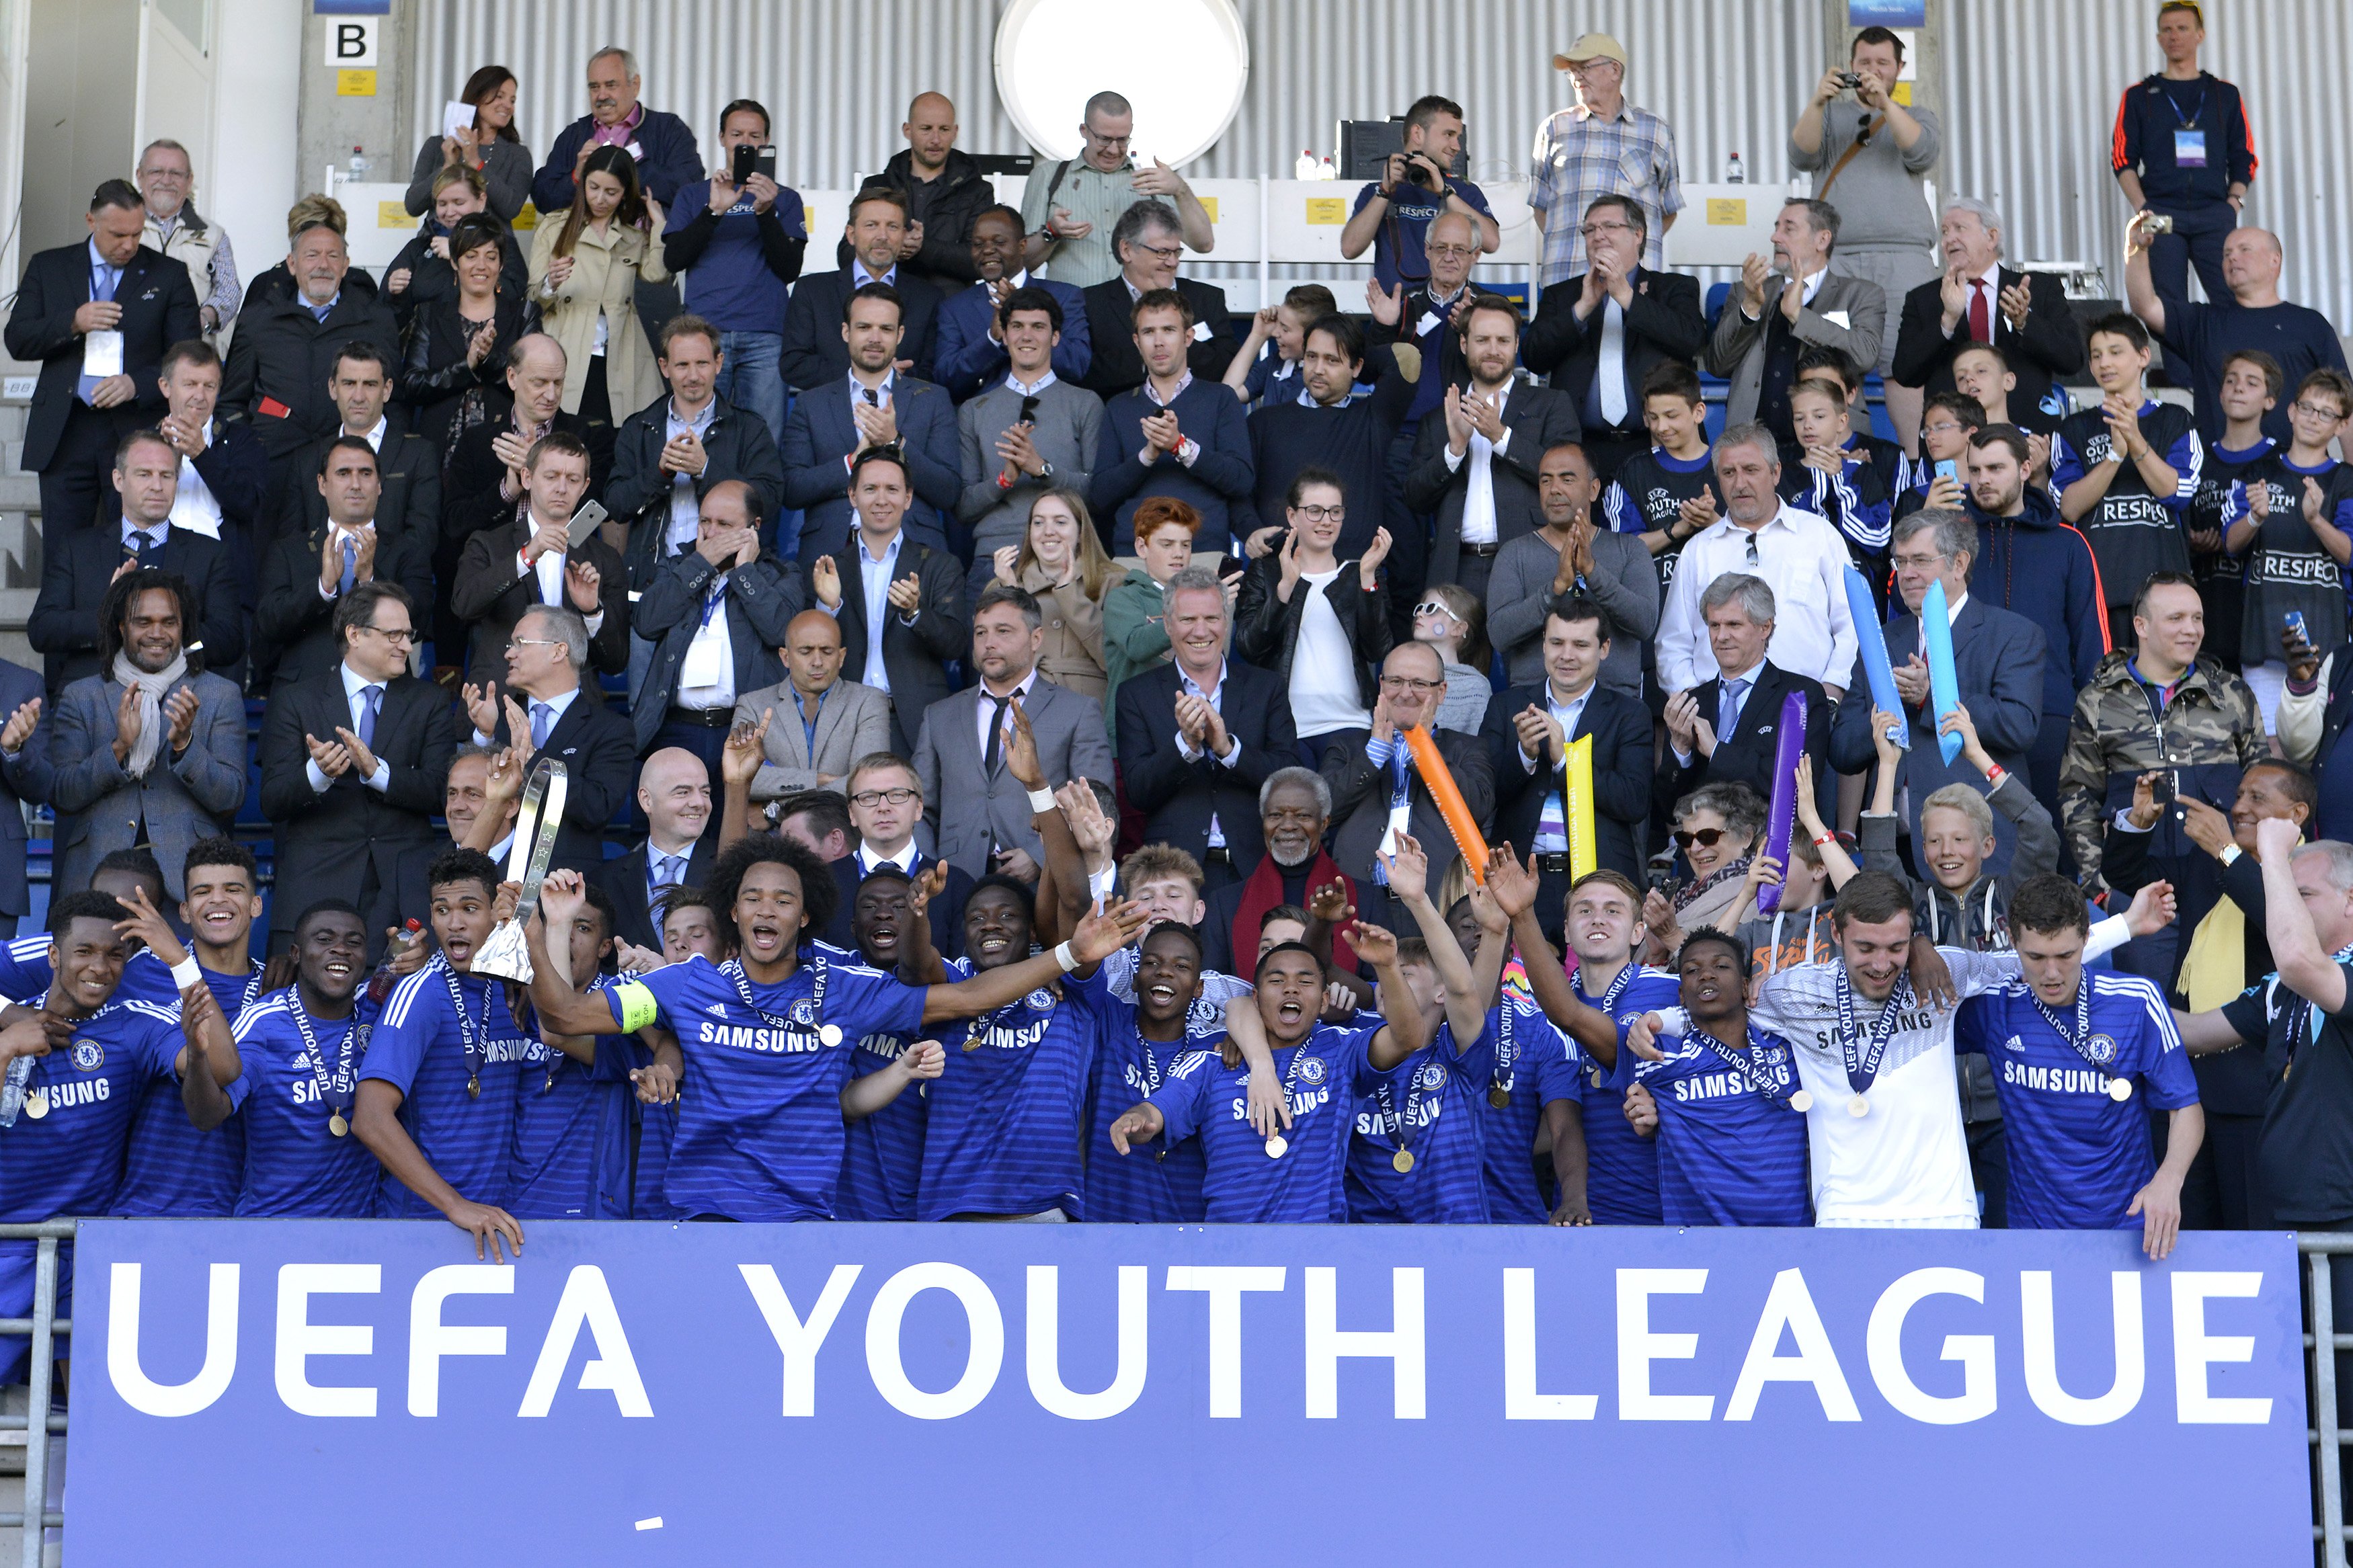 Uefa Youth League 16 Chelsea 15 Chelsea 14 Barcelona Who Will Win The Uyl In 17 T Co 6qxfanpcq8 Twitter